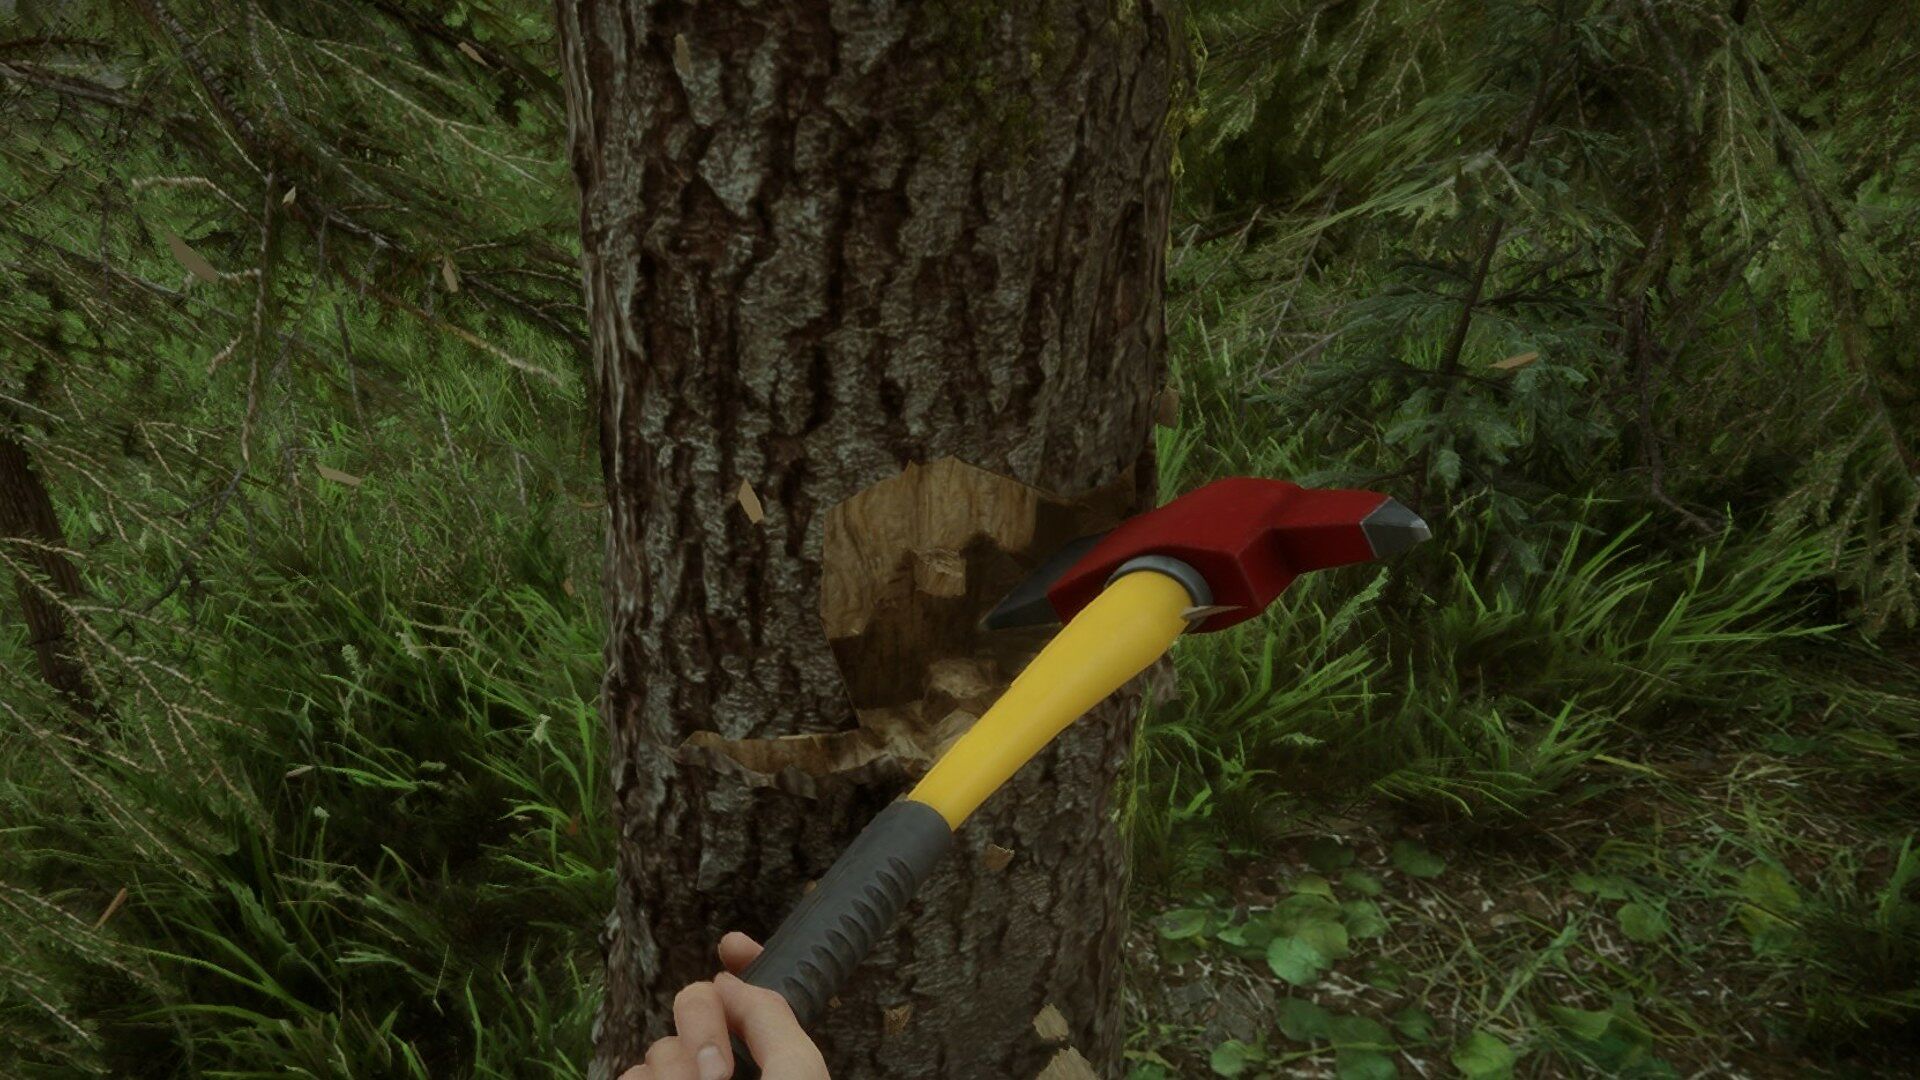 The player uses the firefighter ax in Sons of the Forest to chop down a tree.